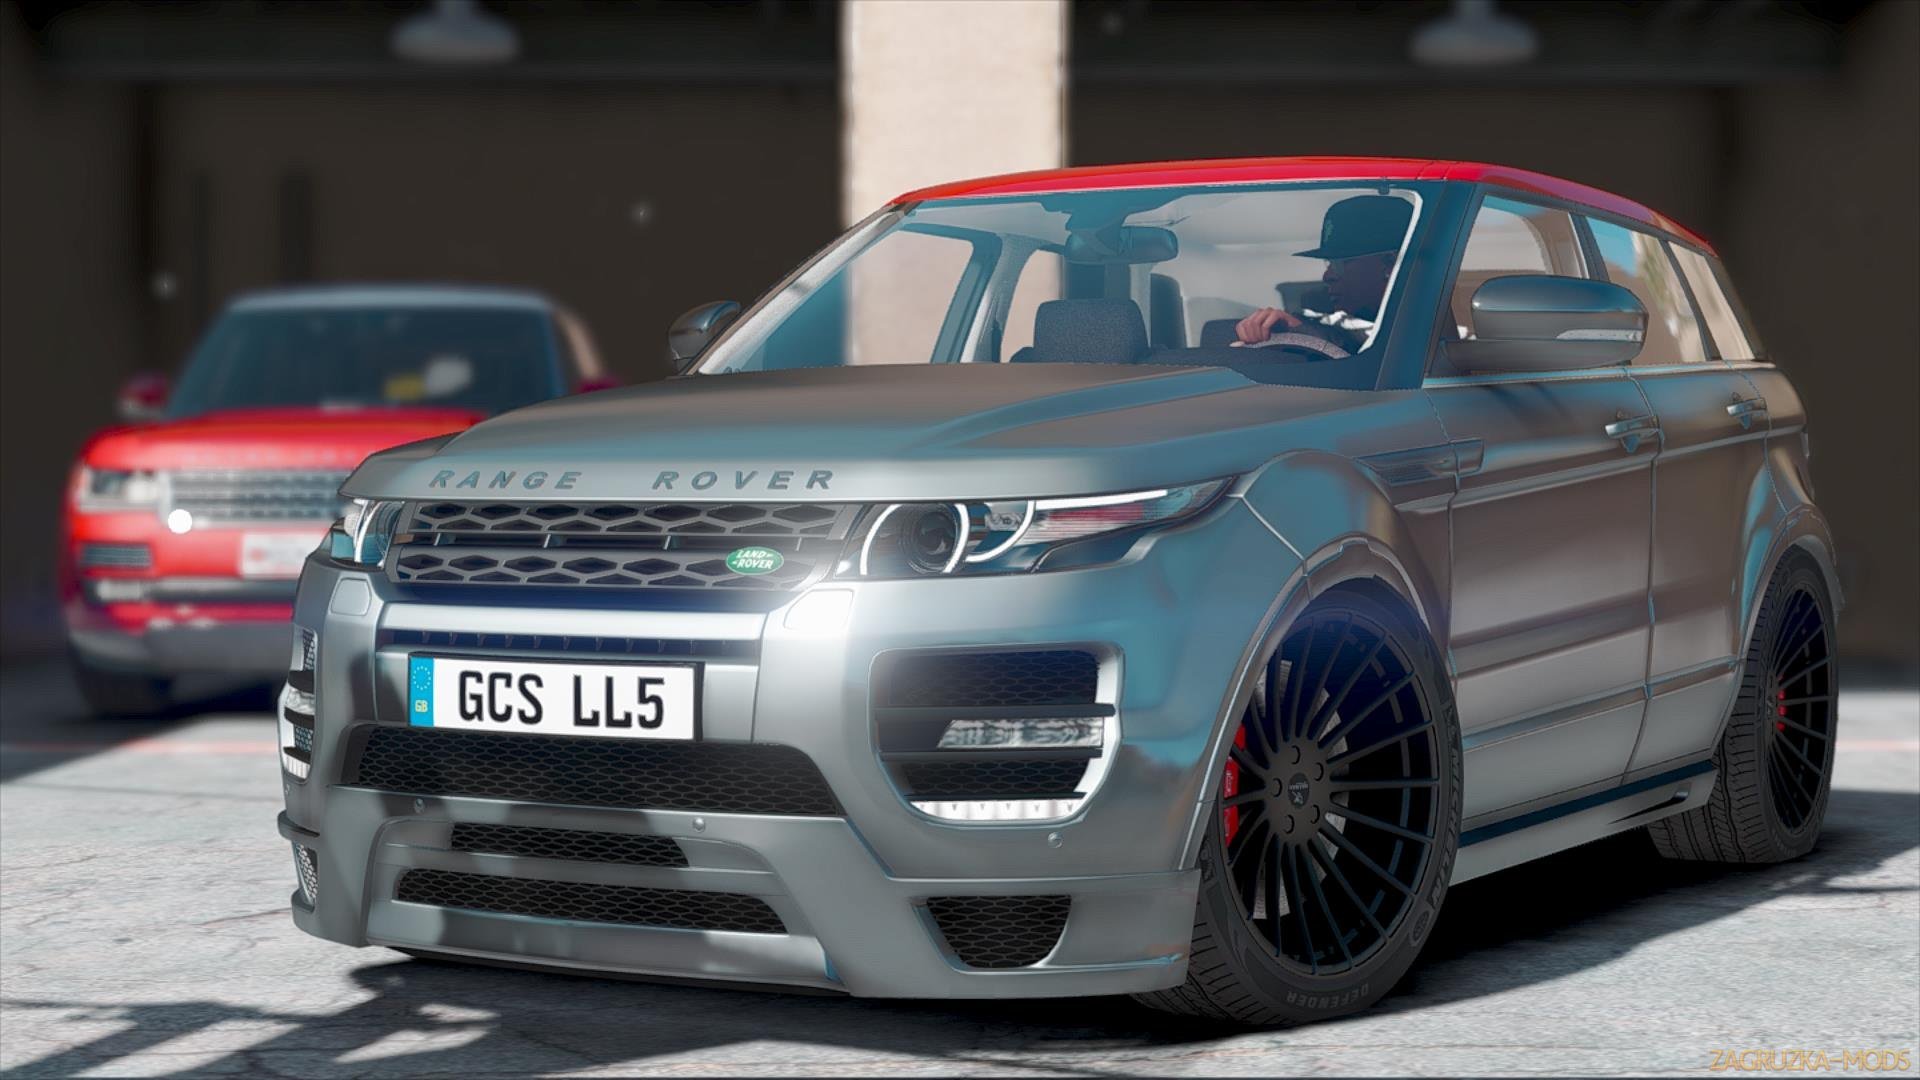 Range Rover Evoque Tuning by HAMANN v1.0 for GTA 5